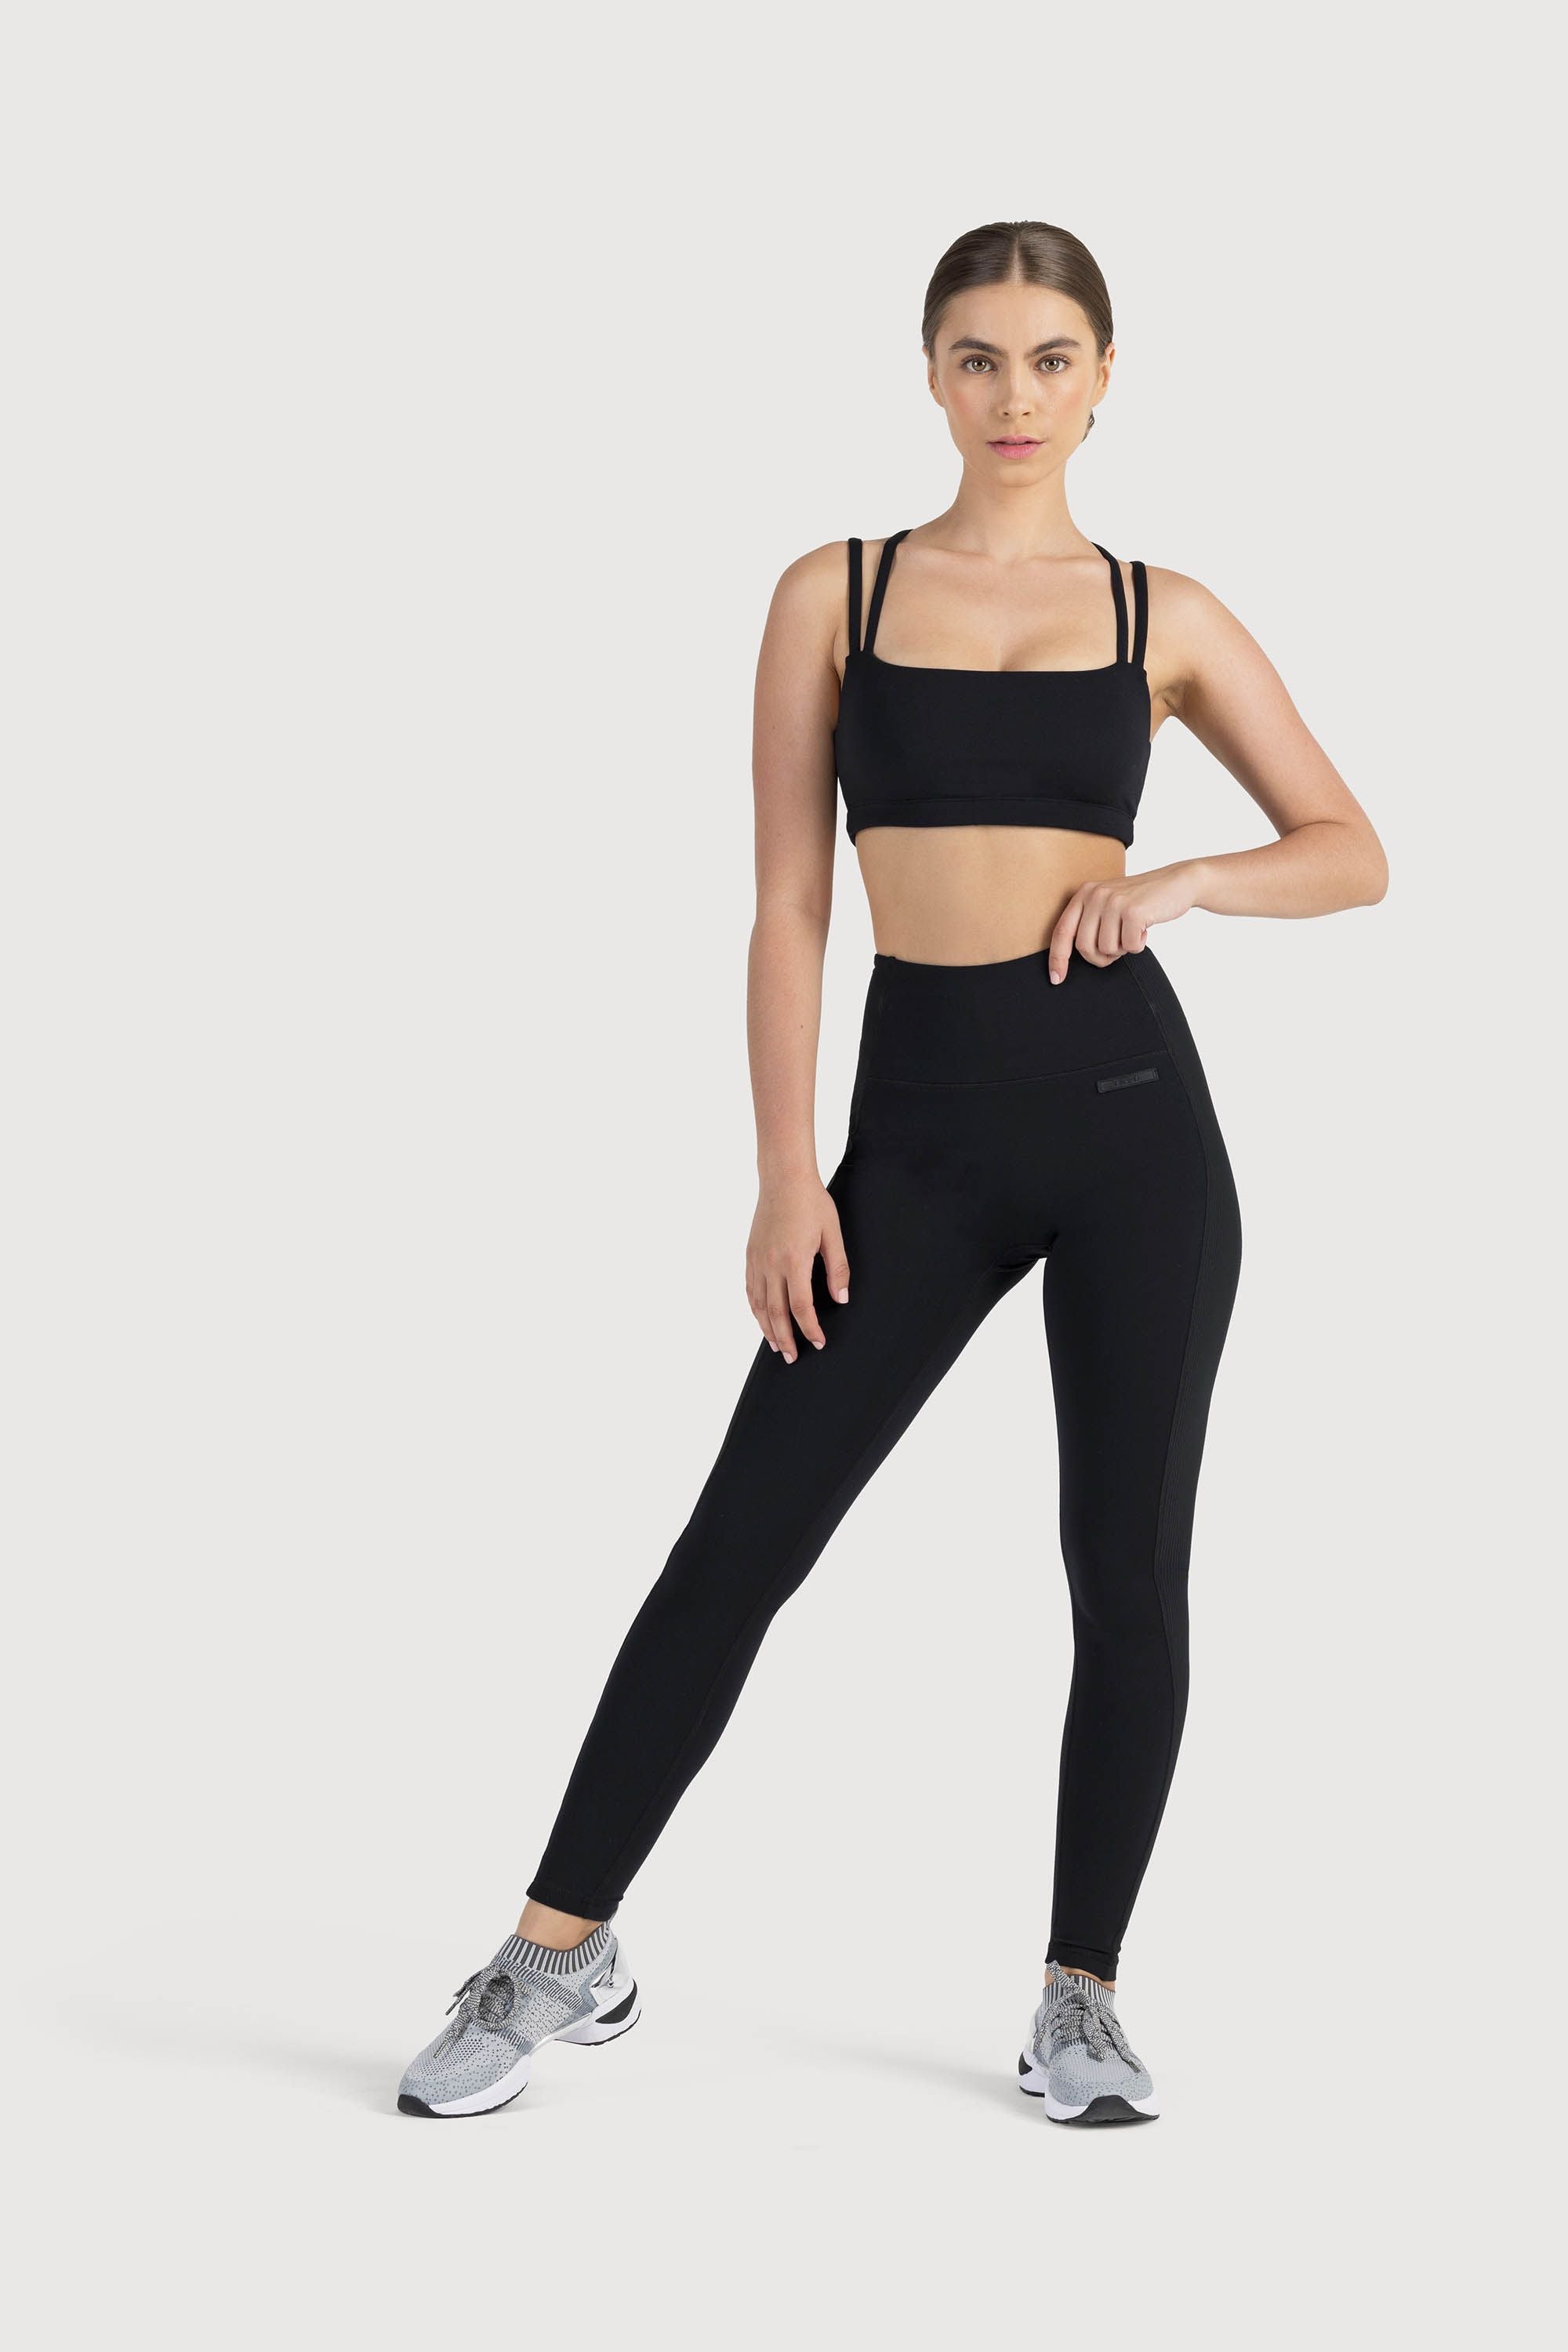 Bloch Color Block Leggings – And All That Jazz